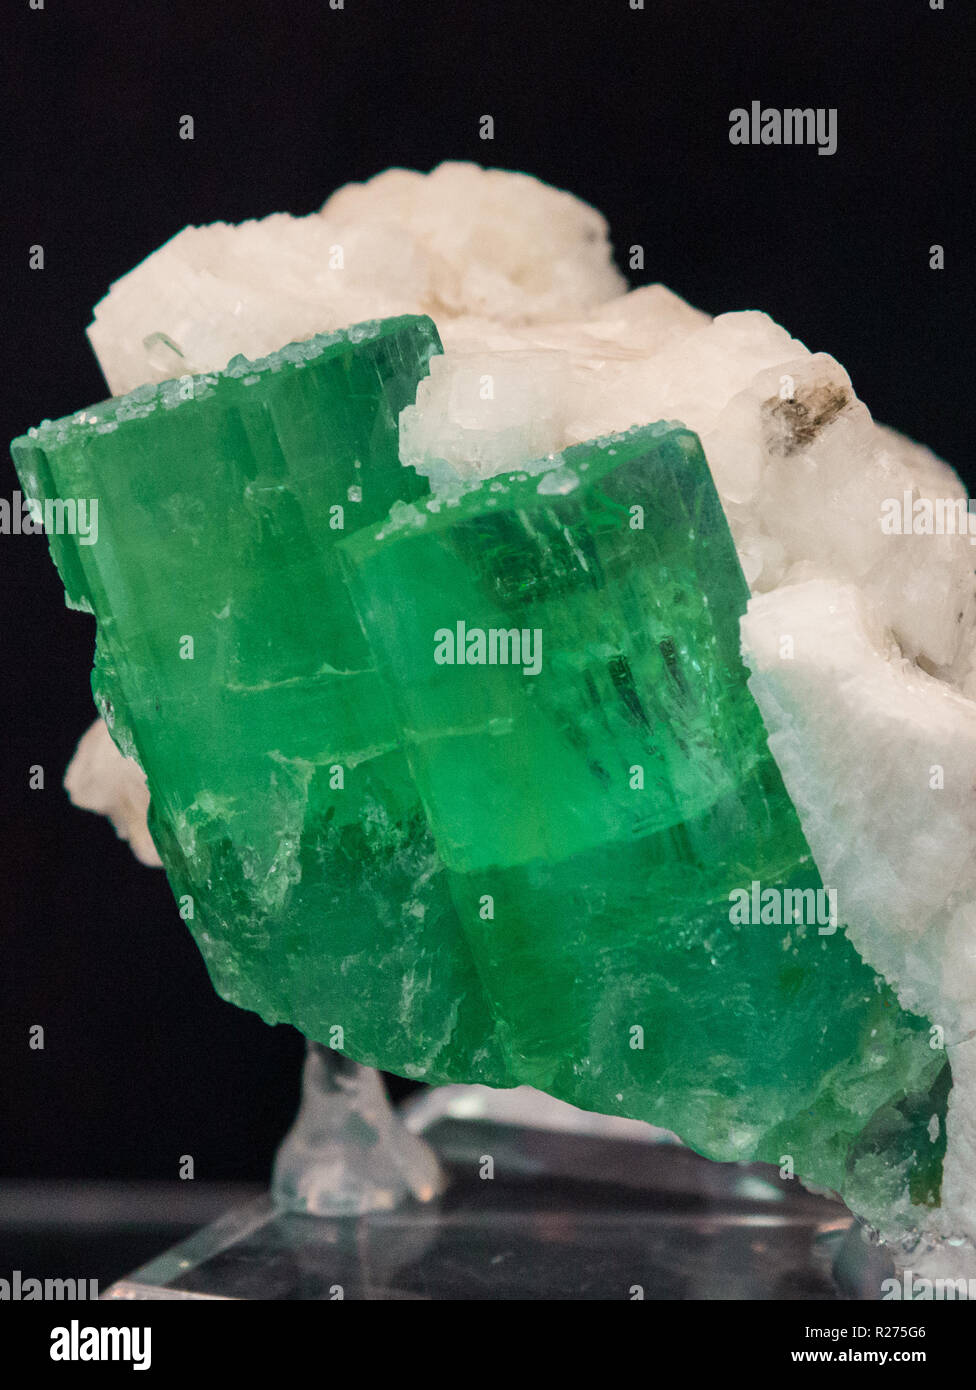 Green crystals of mineral emerald, a variety of beryl, in white matrix. Stock Photo